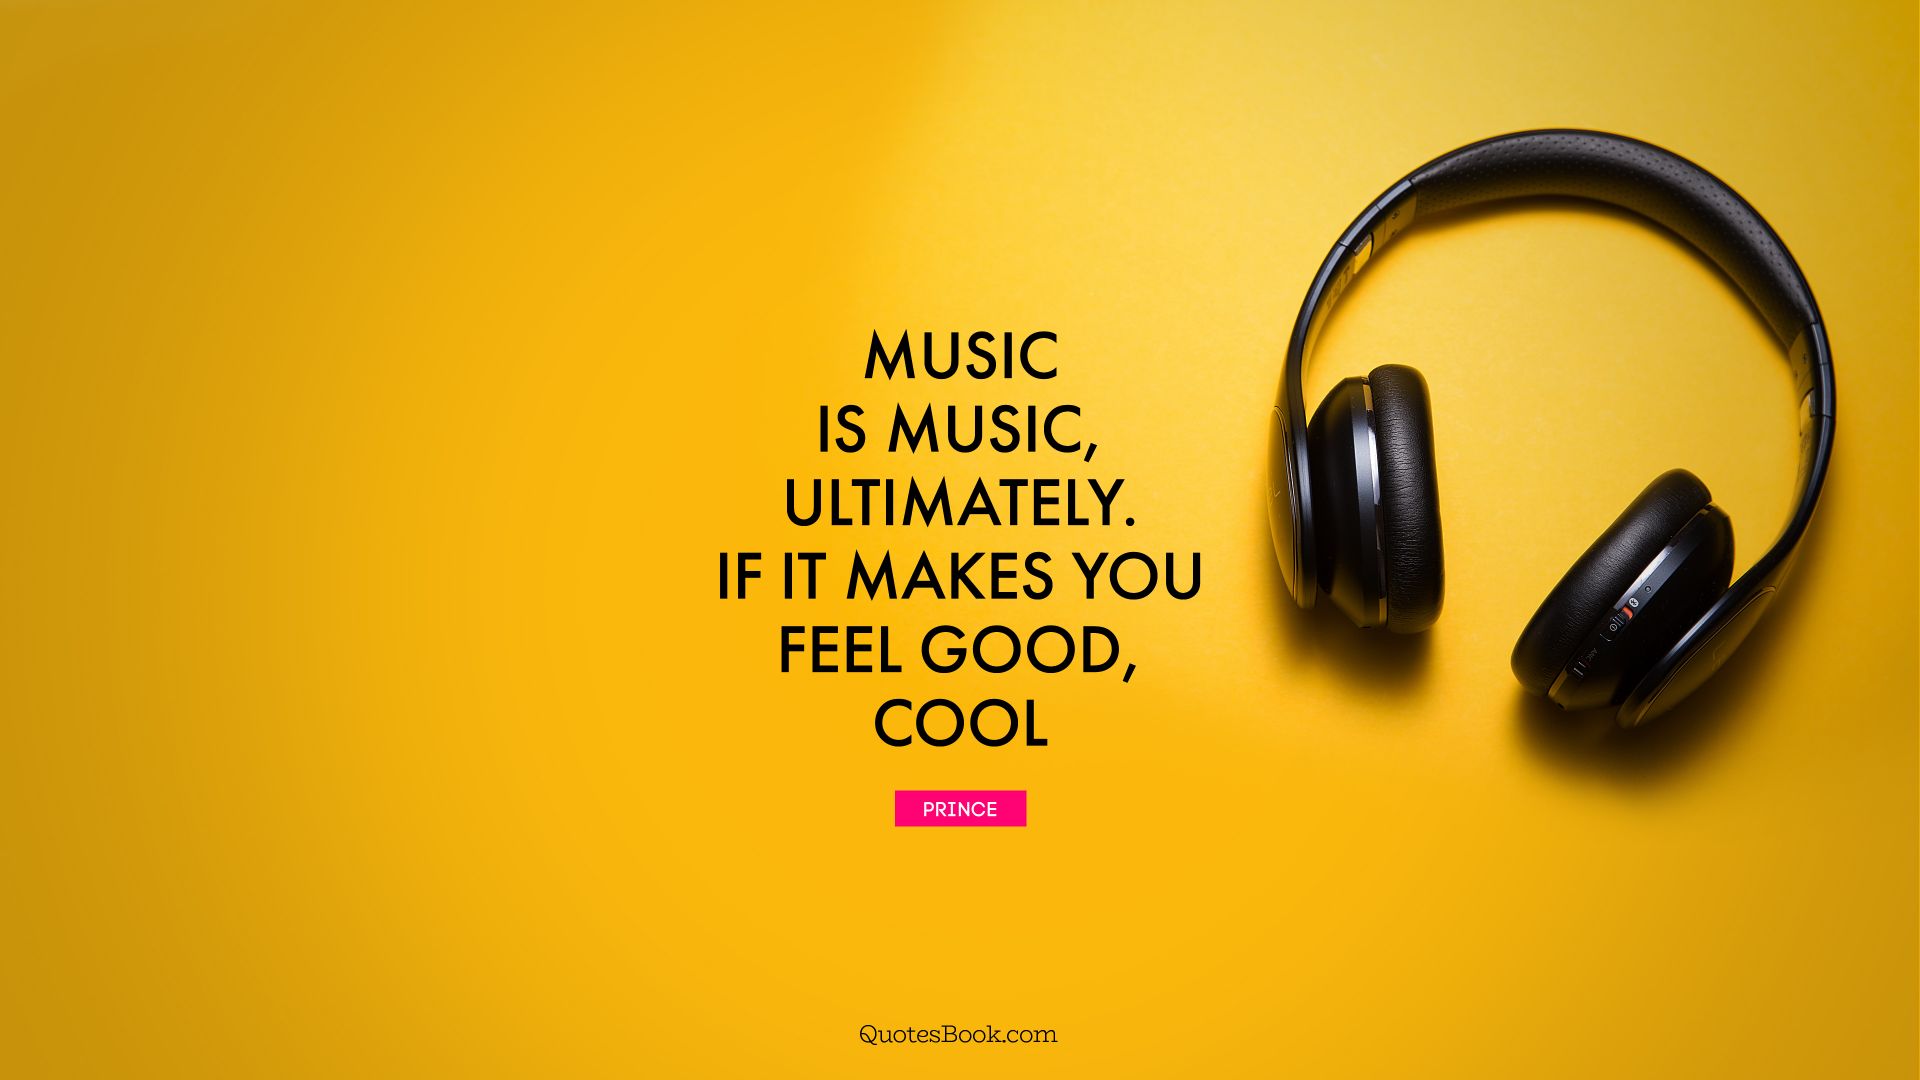 Music is music, ultimately. If it makes you feel good, cool. - Quote by Prince